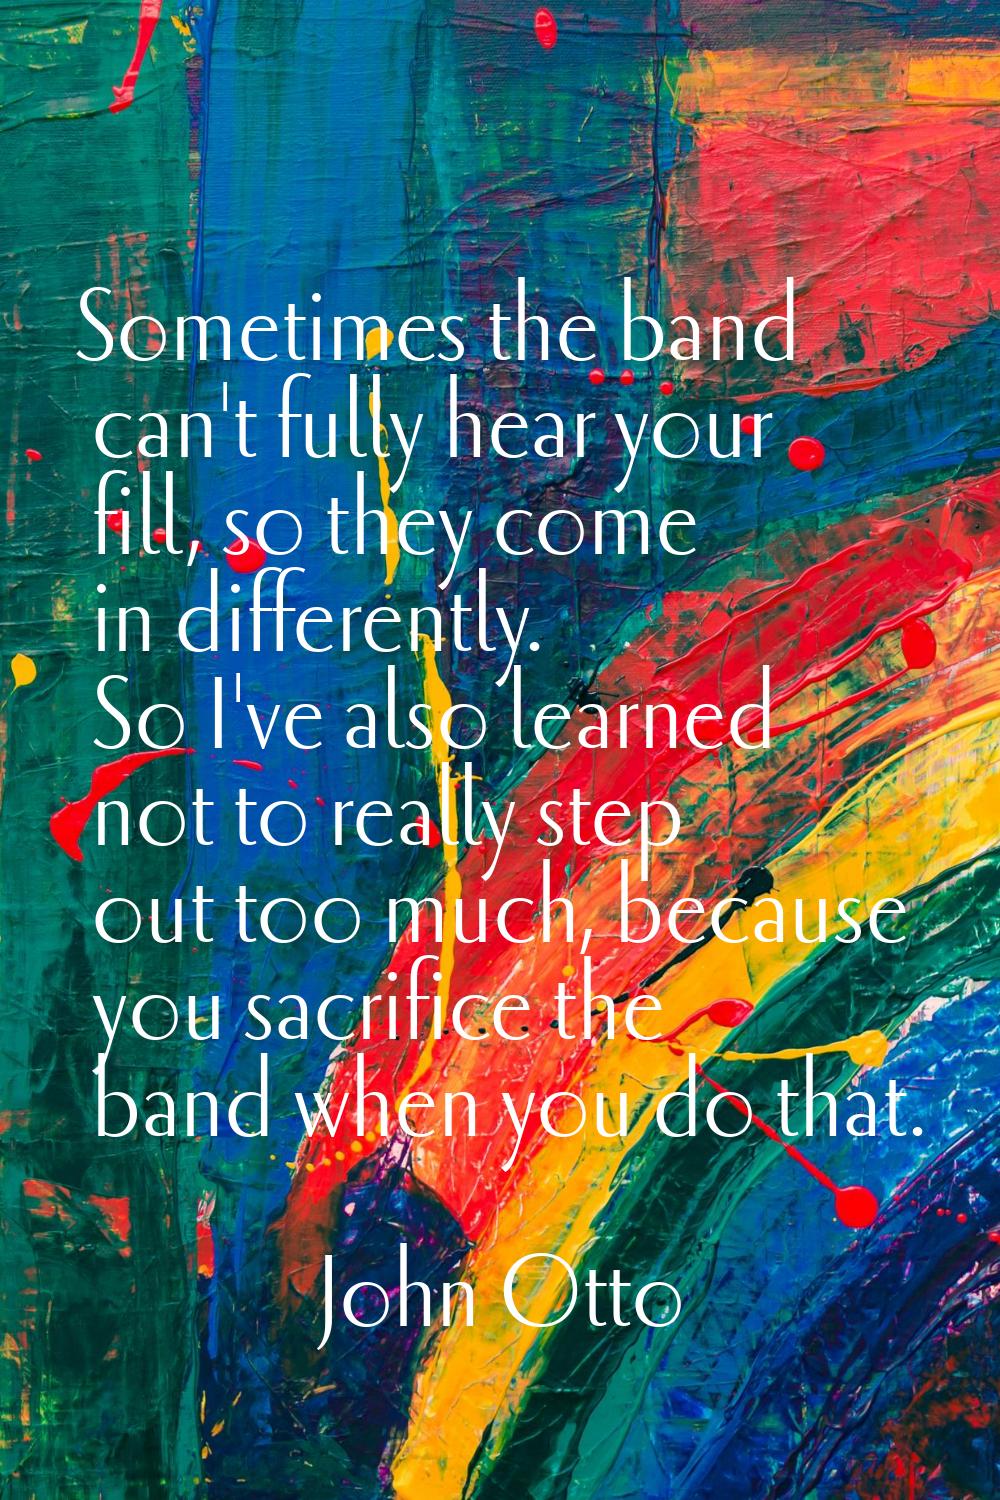 Sometimes the band can't fully hear your fill, so they come in differently. So I've also learned no